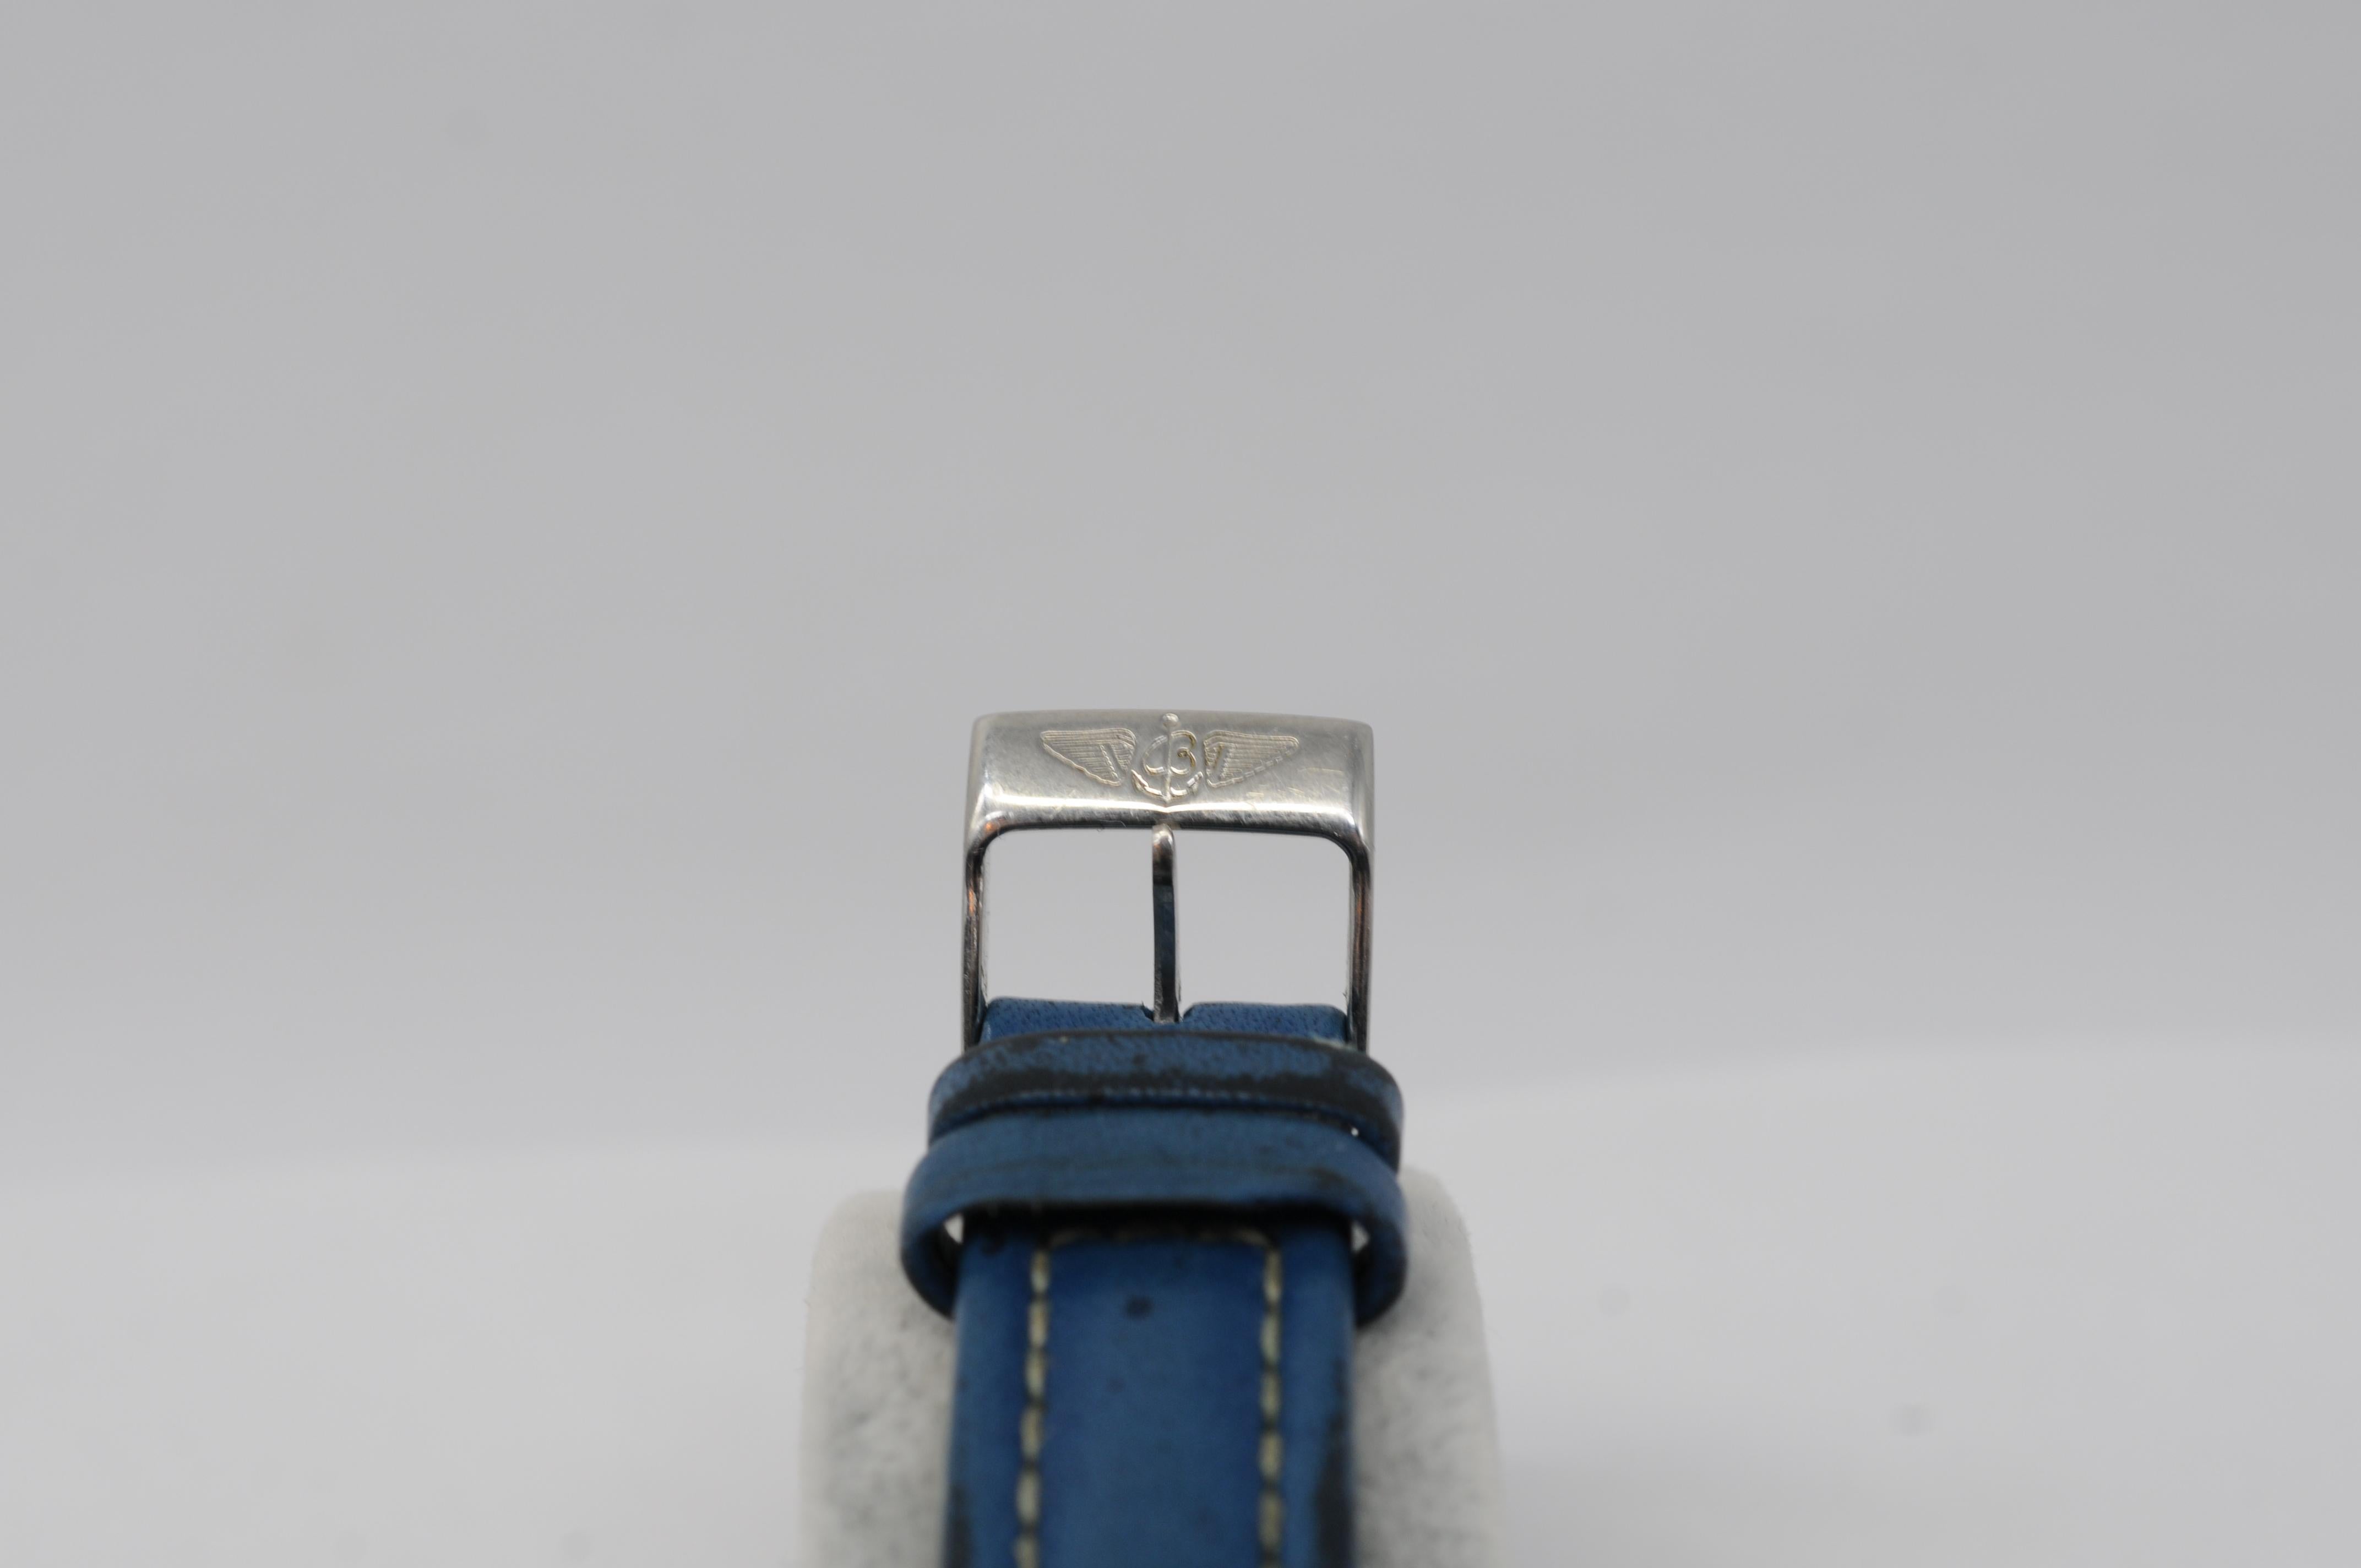 Breitling Lady J D52065 with a deep blue leather strap For Sale 6